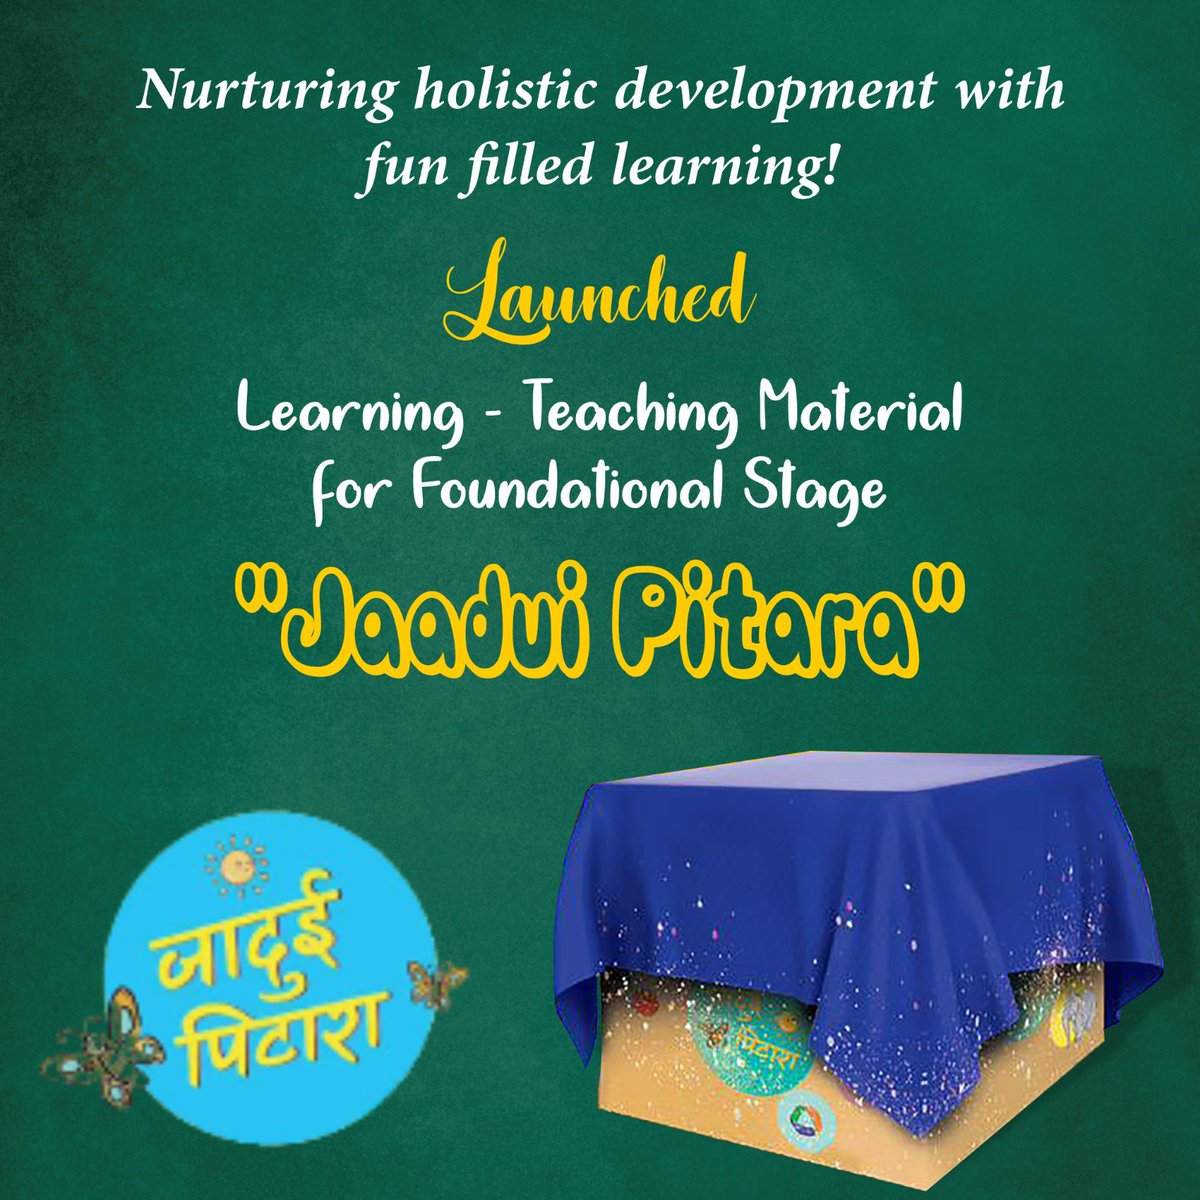 Fostering inclusive development of children through play and activity based learning! Today, an innovative, Learning-Teaching material (#JaaduiPitara) for the Foundational Stage has been launched for overall development of learners of 3 to 8 years age group, as per #NEP2020.